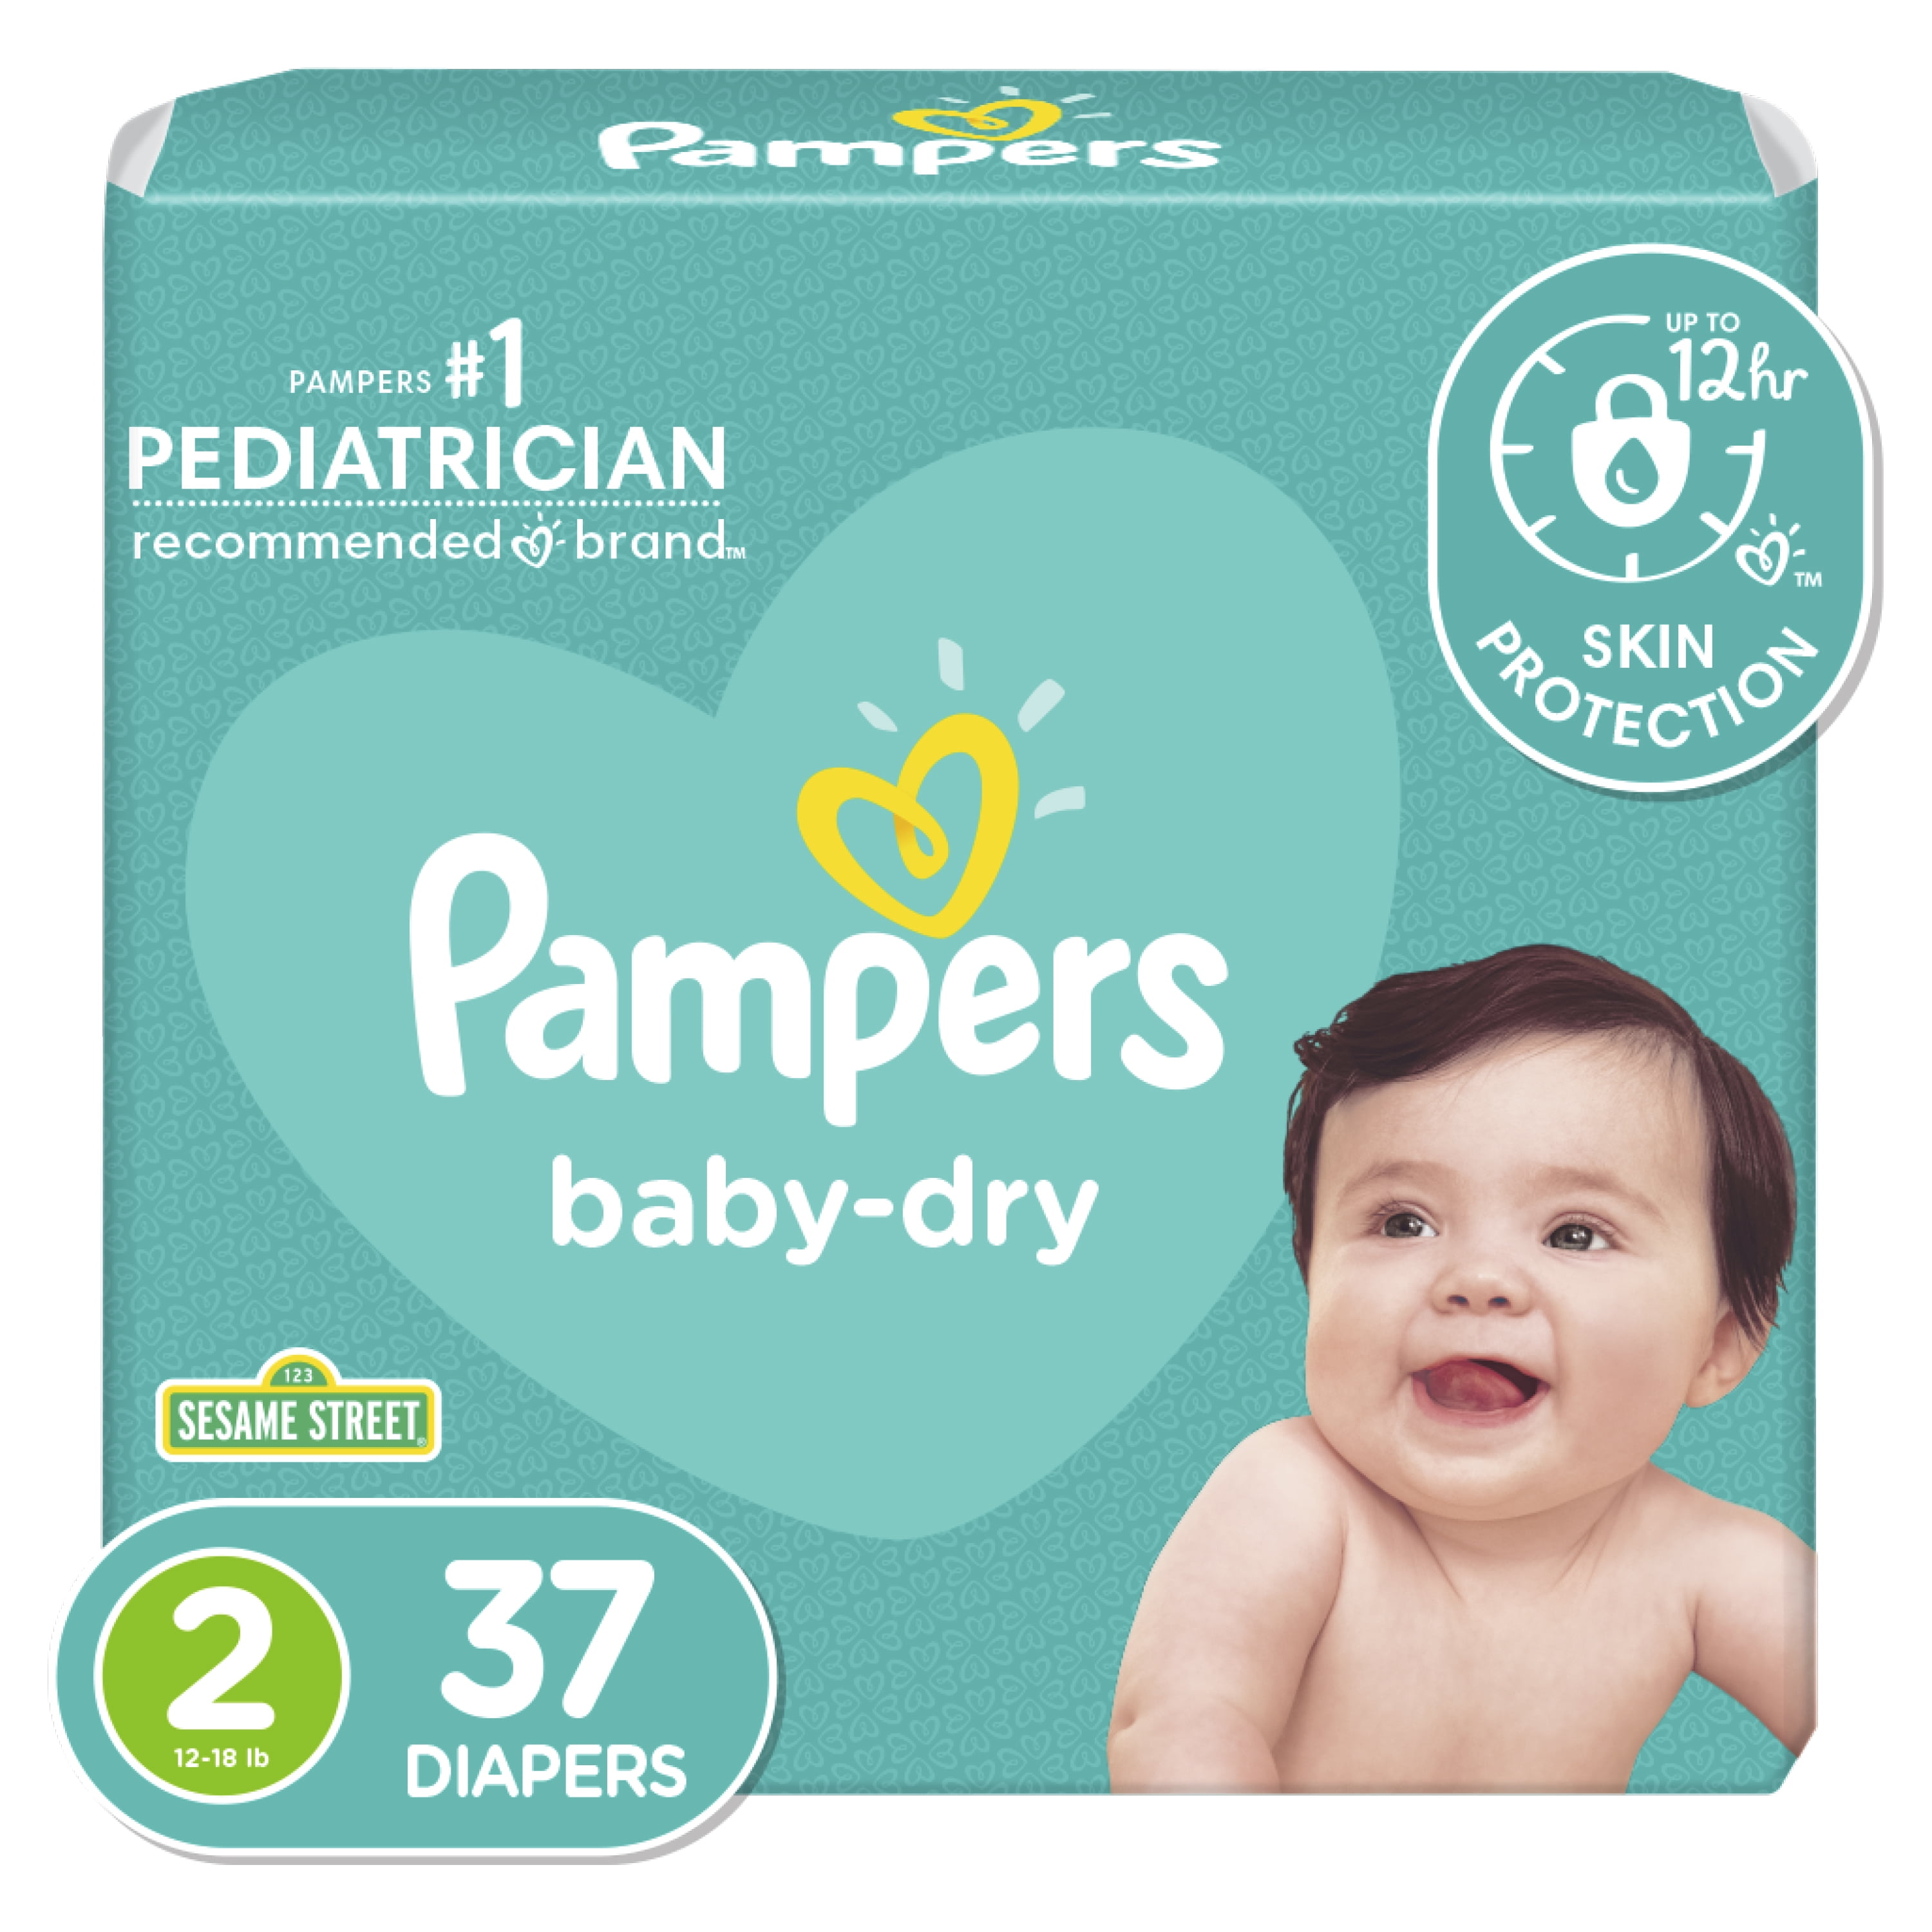 Baby-Dry Protection Diapers, Size 37 Count - Walmart.com